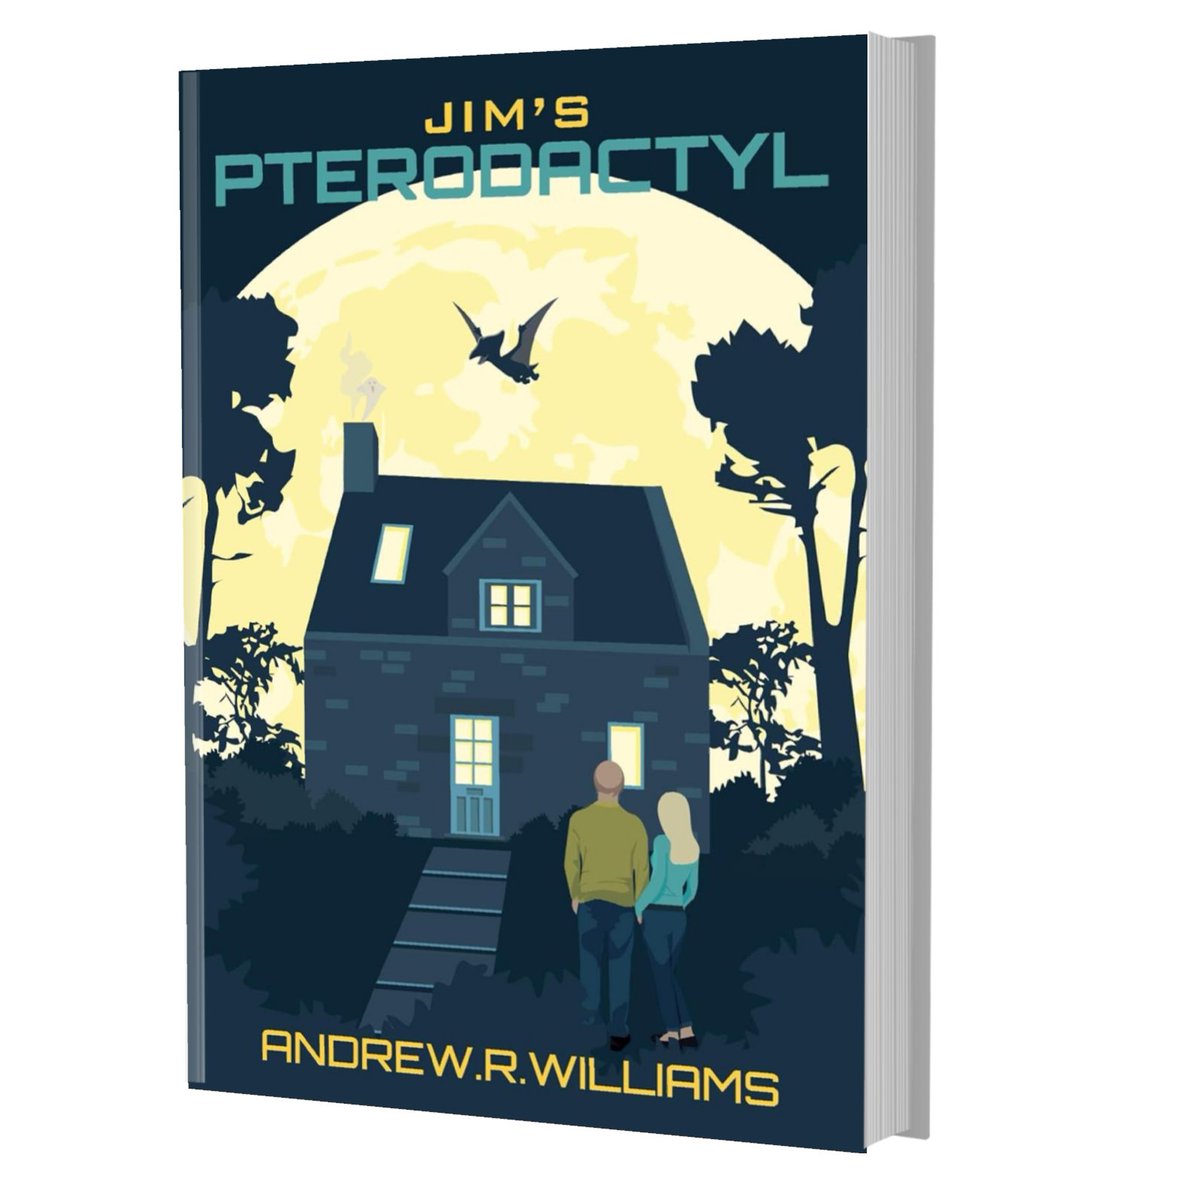 Featured Book: Jim’s Pterodactyl - Jim Godwin has an unexpected delivery that takes a hilariously unexpected turn. Imagine a world where ancient creatures collide with everyday life, and you’ll find yourself in the midst of this dark comedy. amazon.com/dp/B0CWYDY56C/… #darkcomedy